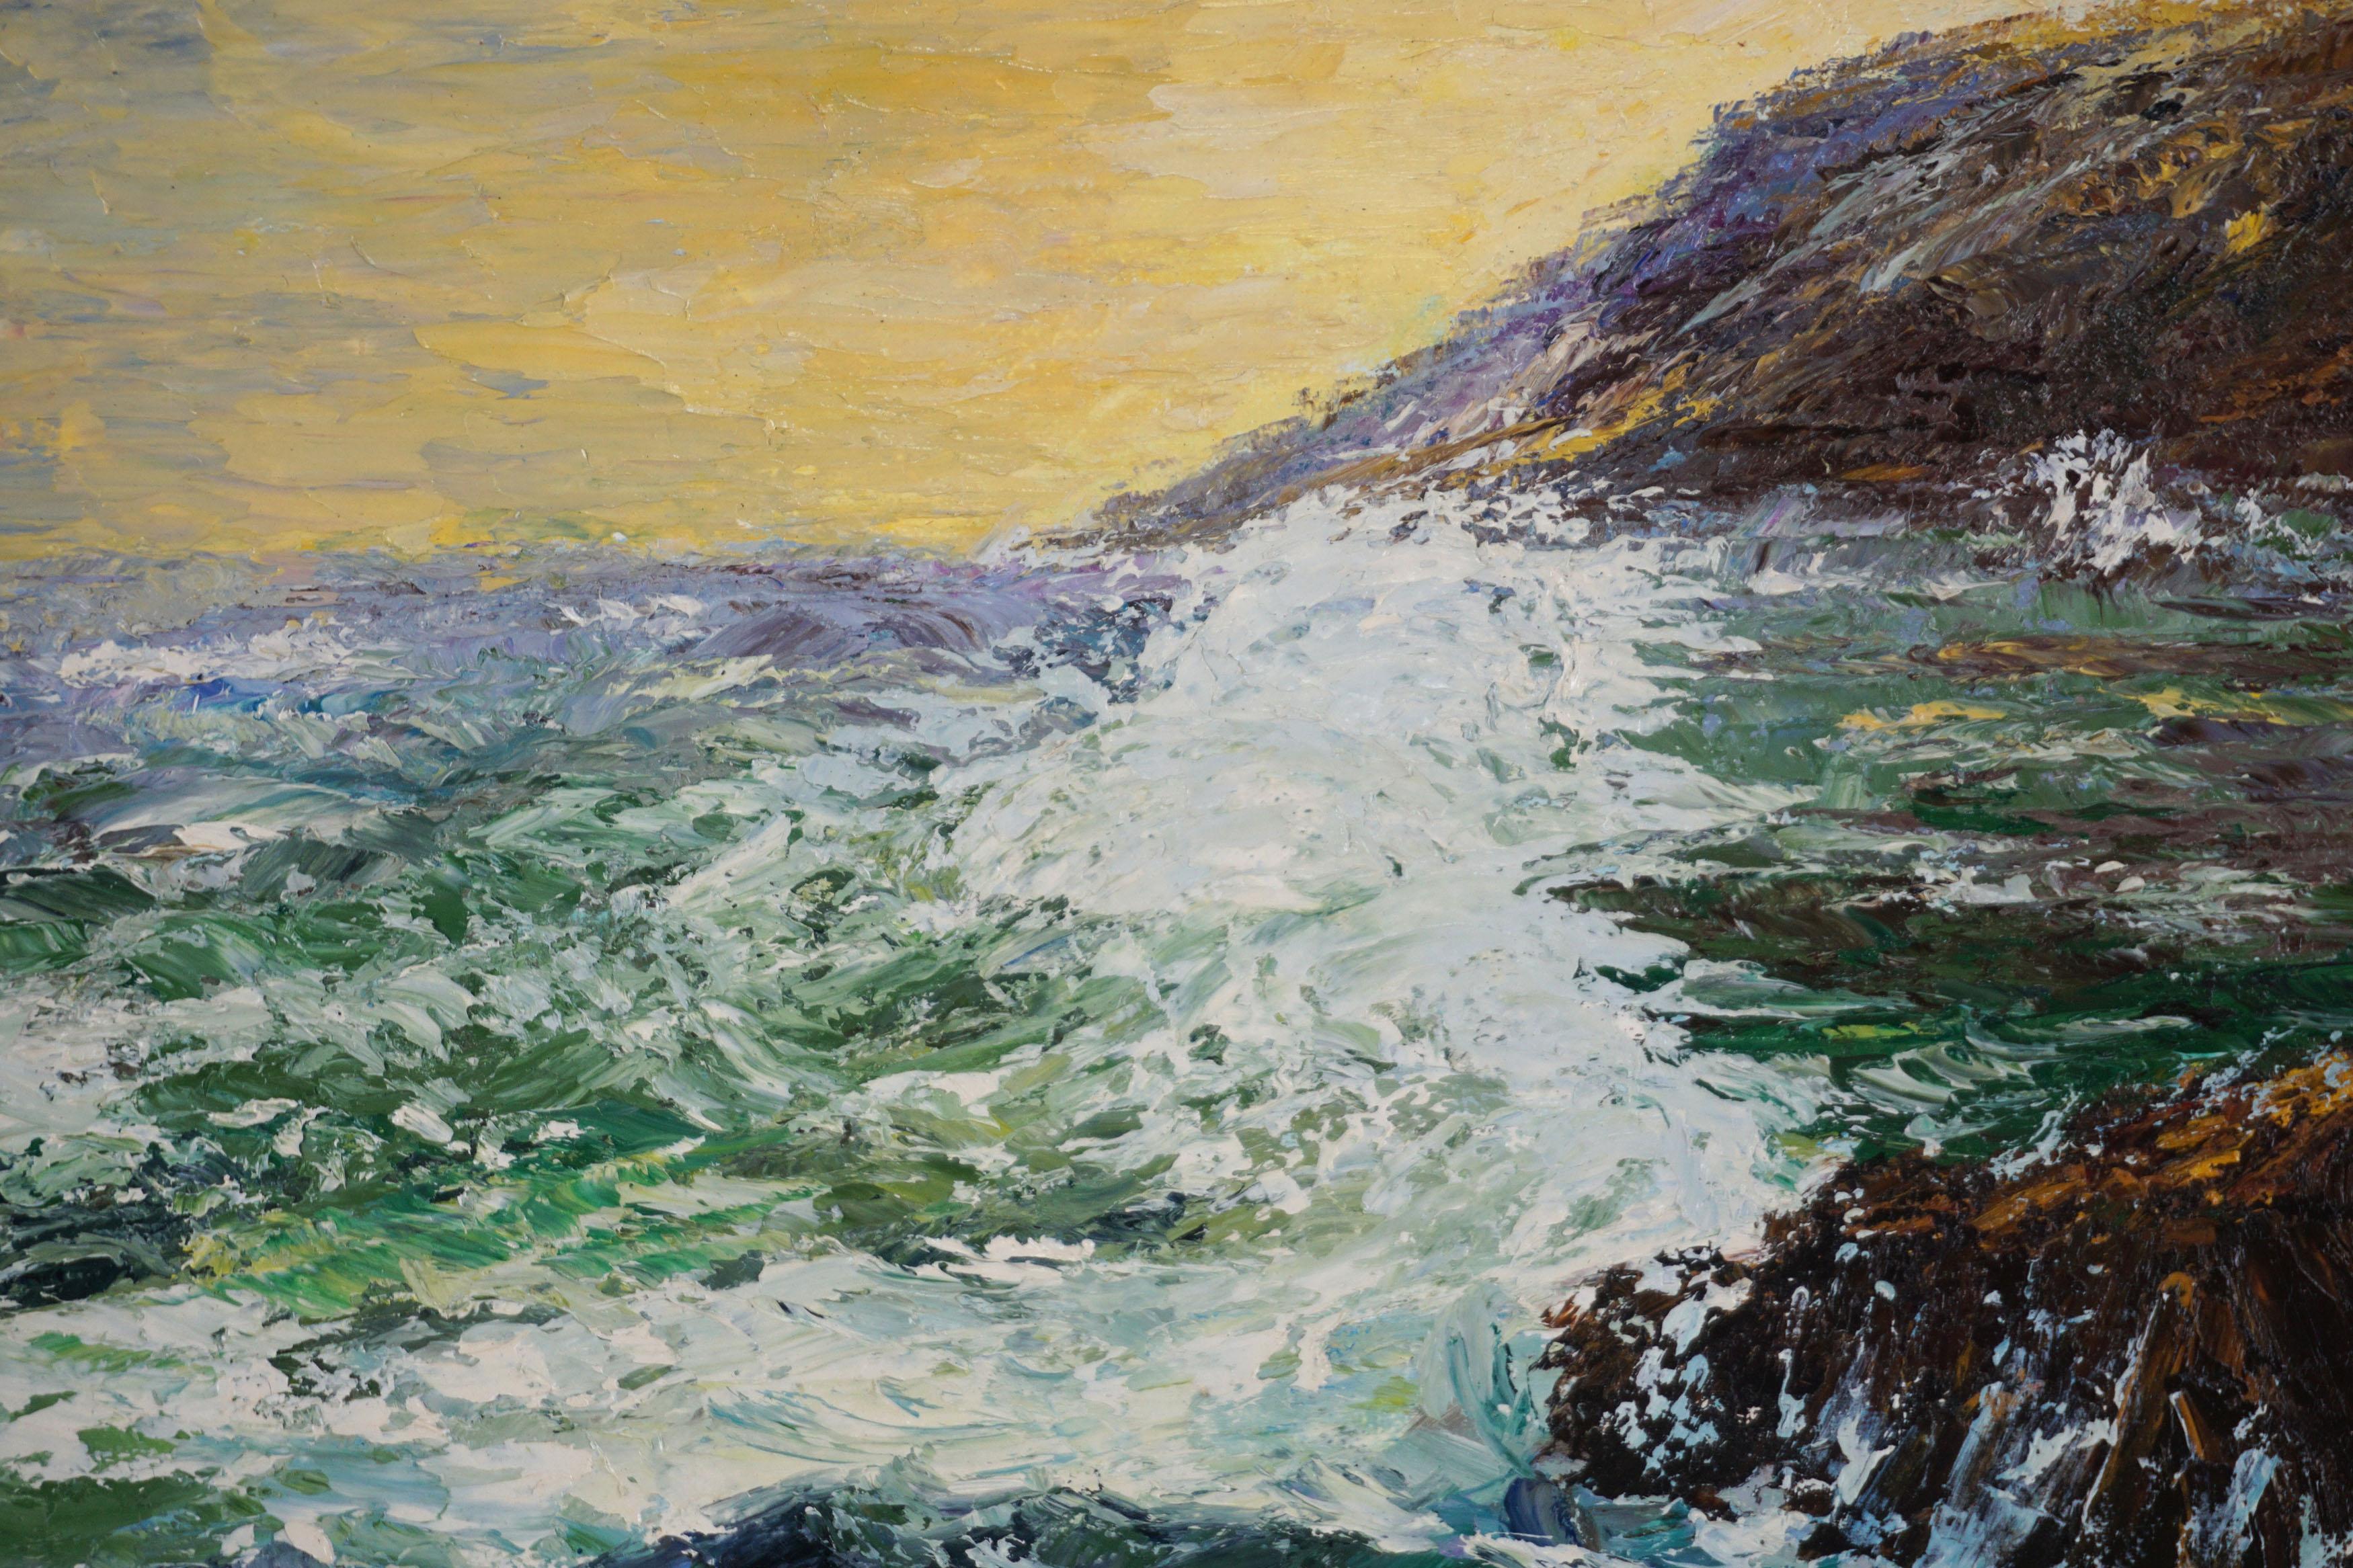 Impasto Big Sur Sea Cave and Breaking Waves Seascape - Painting by Unknown